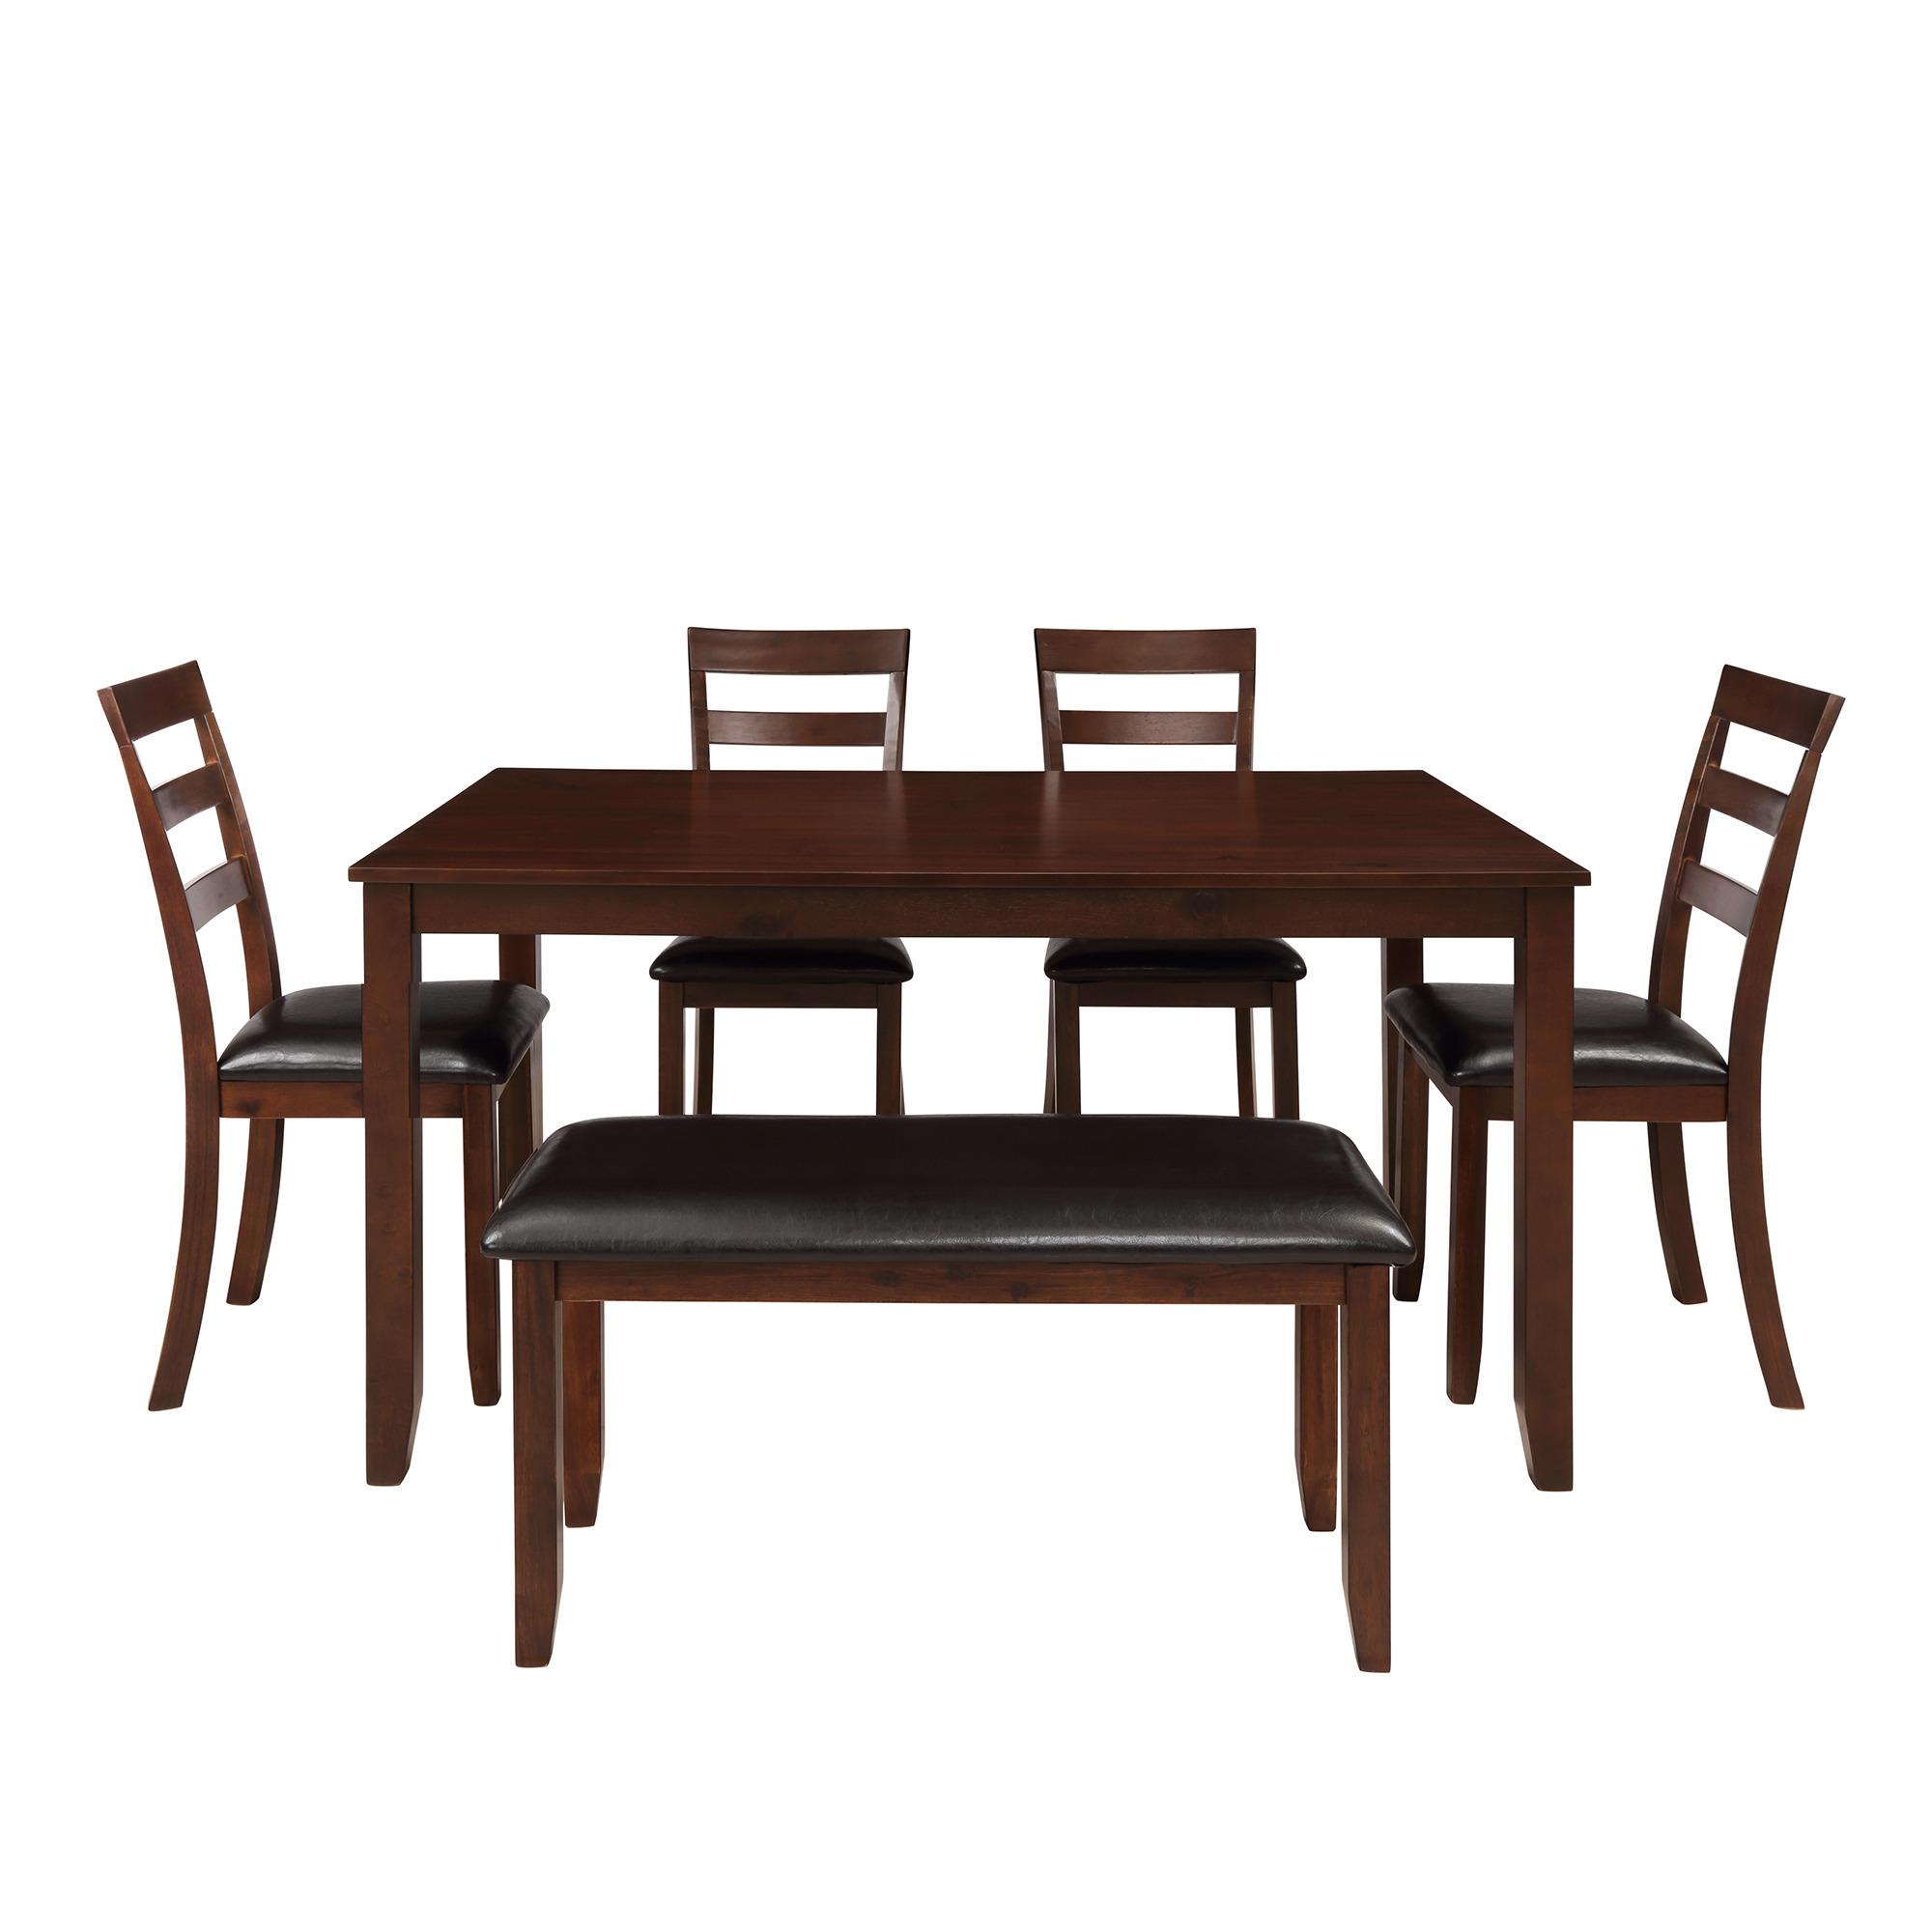 EUROCO 6-Piece Dining Room Table Set with 4 Ladder Chairs and Bench, Brown - image 4 of 7